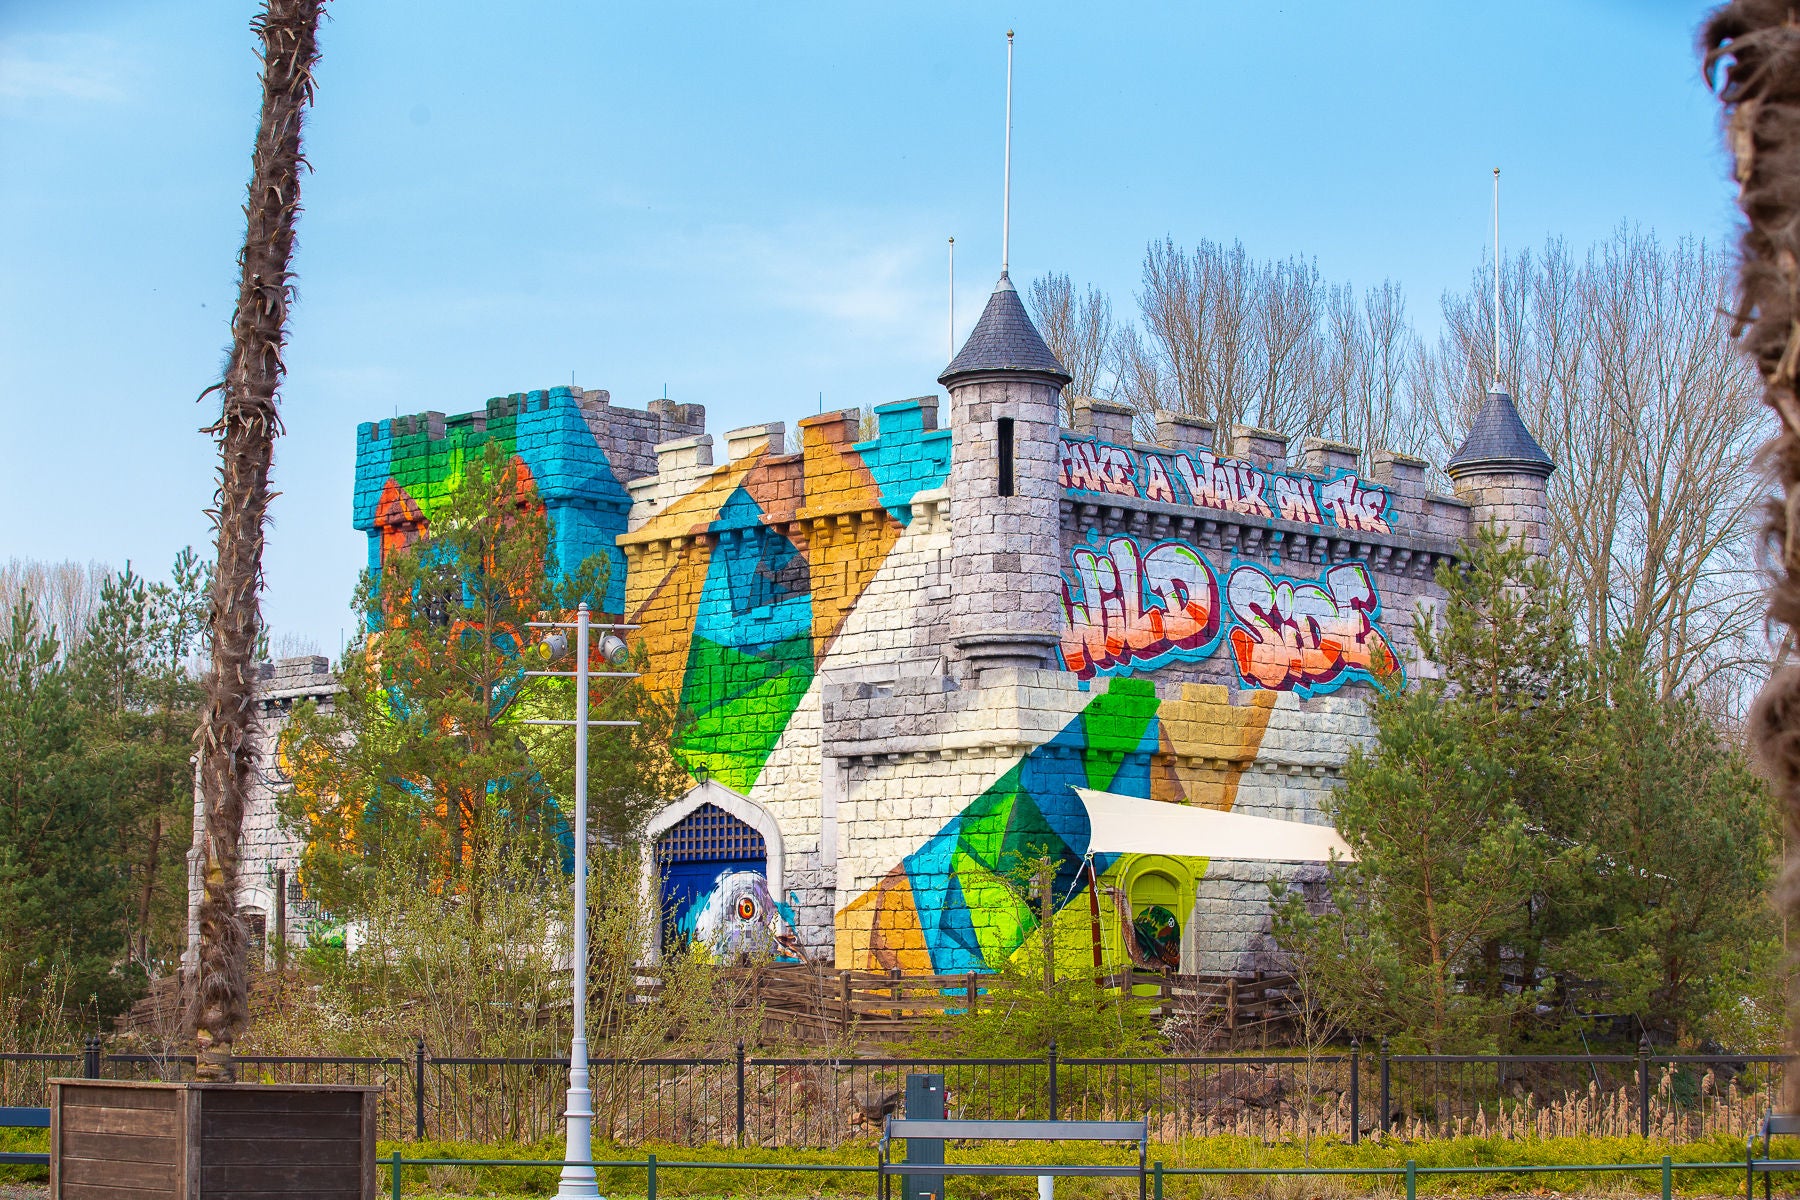 Frontview of Merlin's magic castle, a catls with bright colors, in walibi Holland